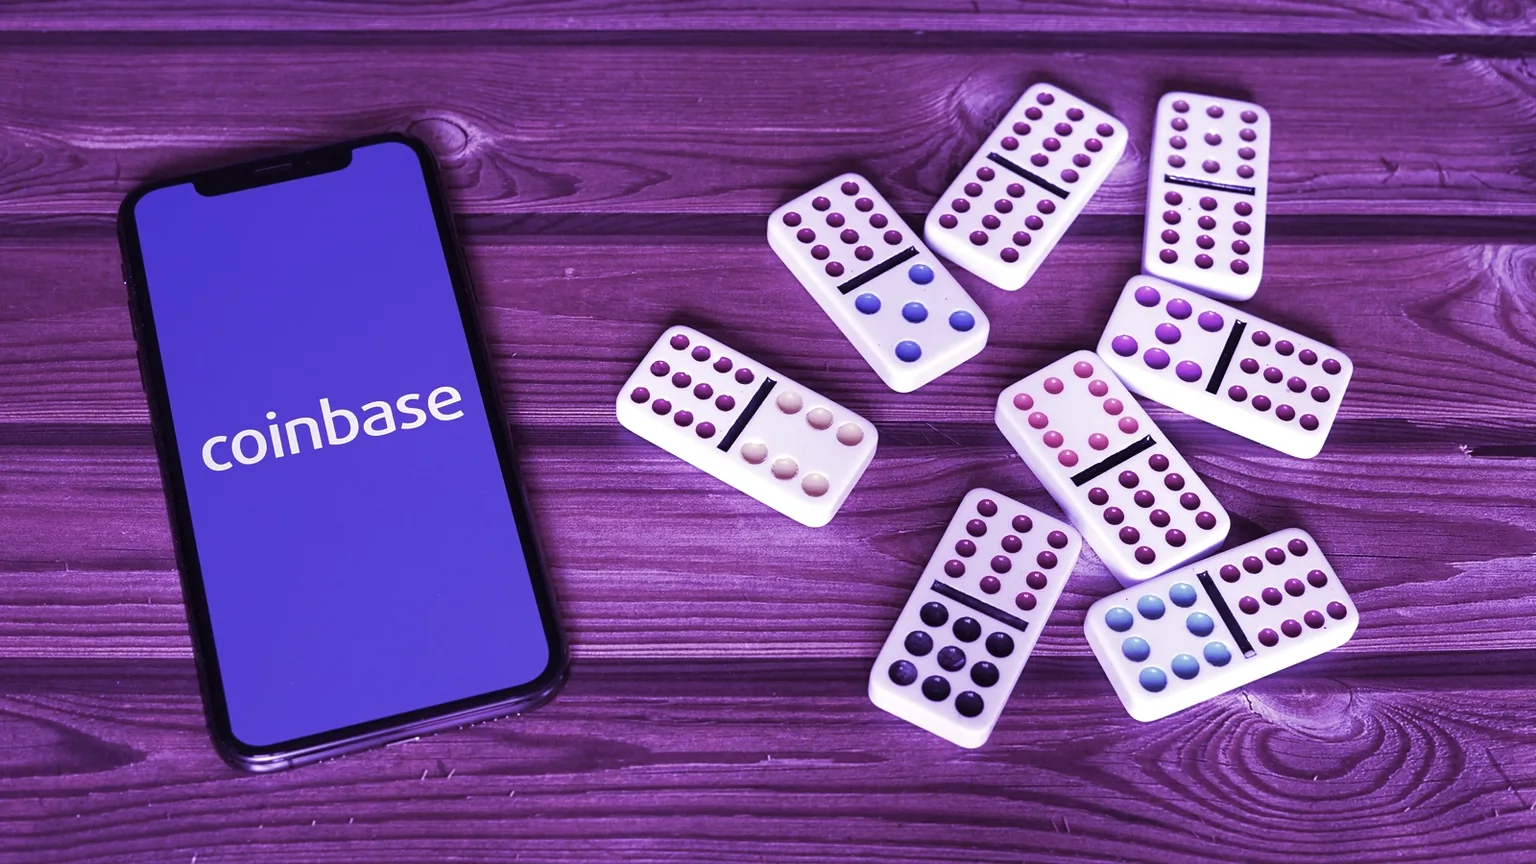 Coinbase is a leading crypto exchange. Image: Shutterstock